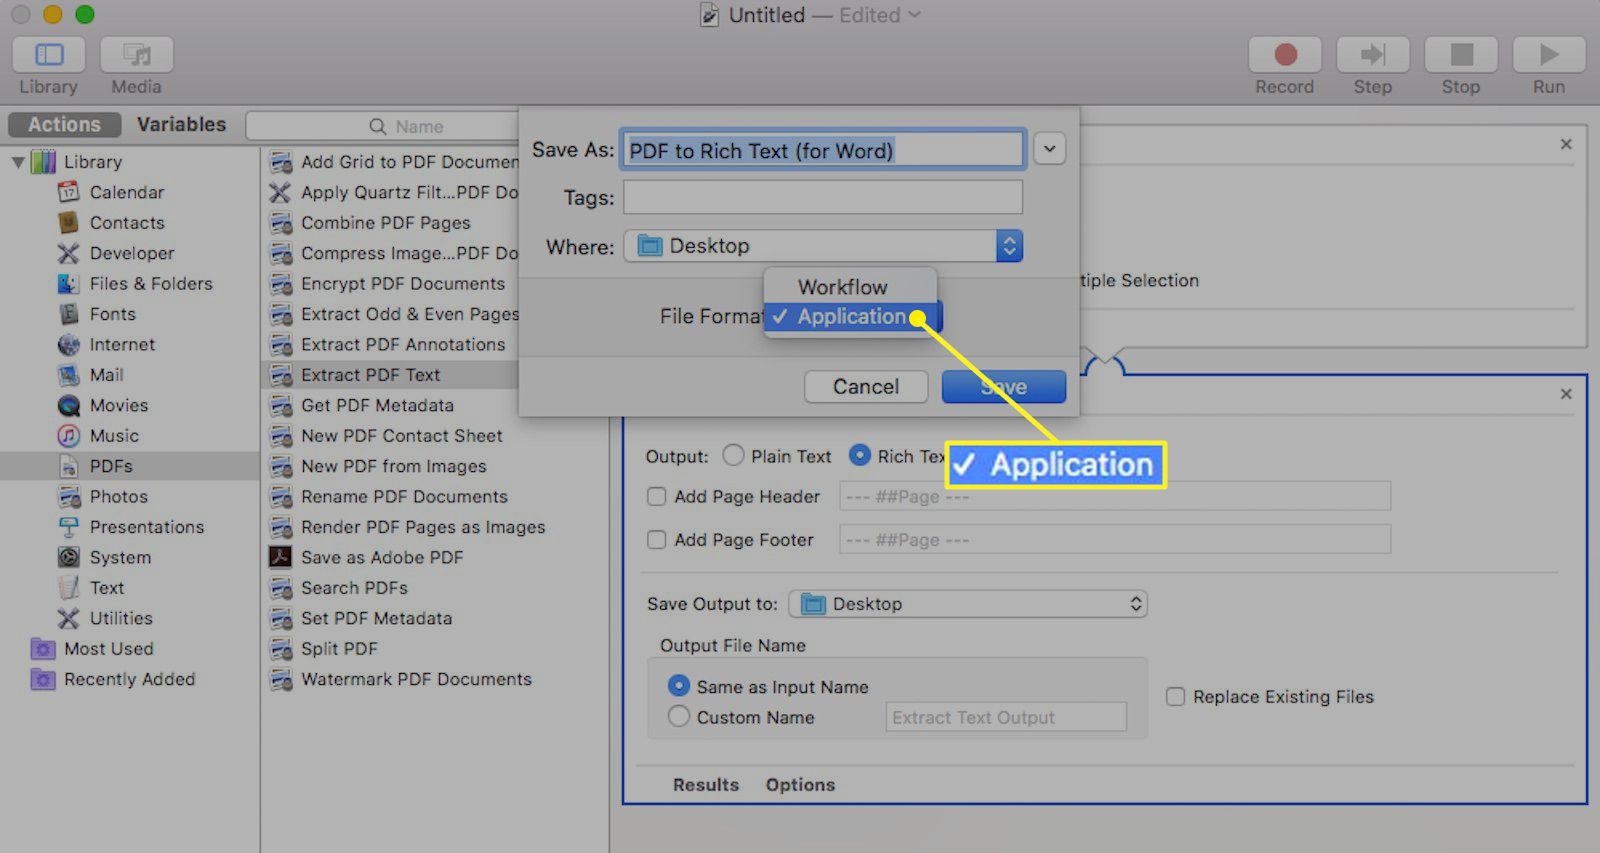 convert pdf to word on a mac for free